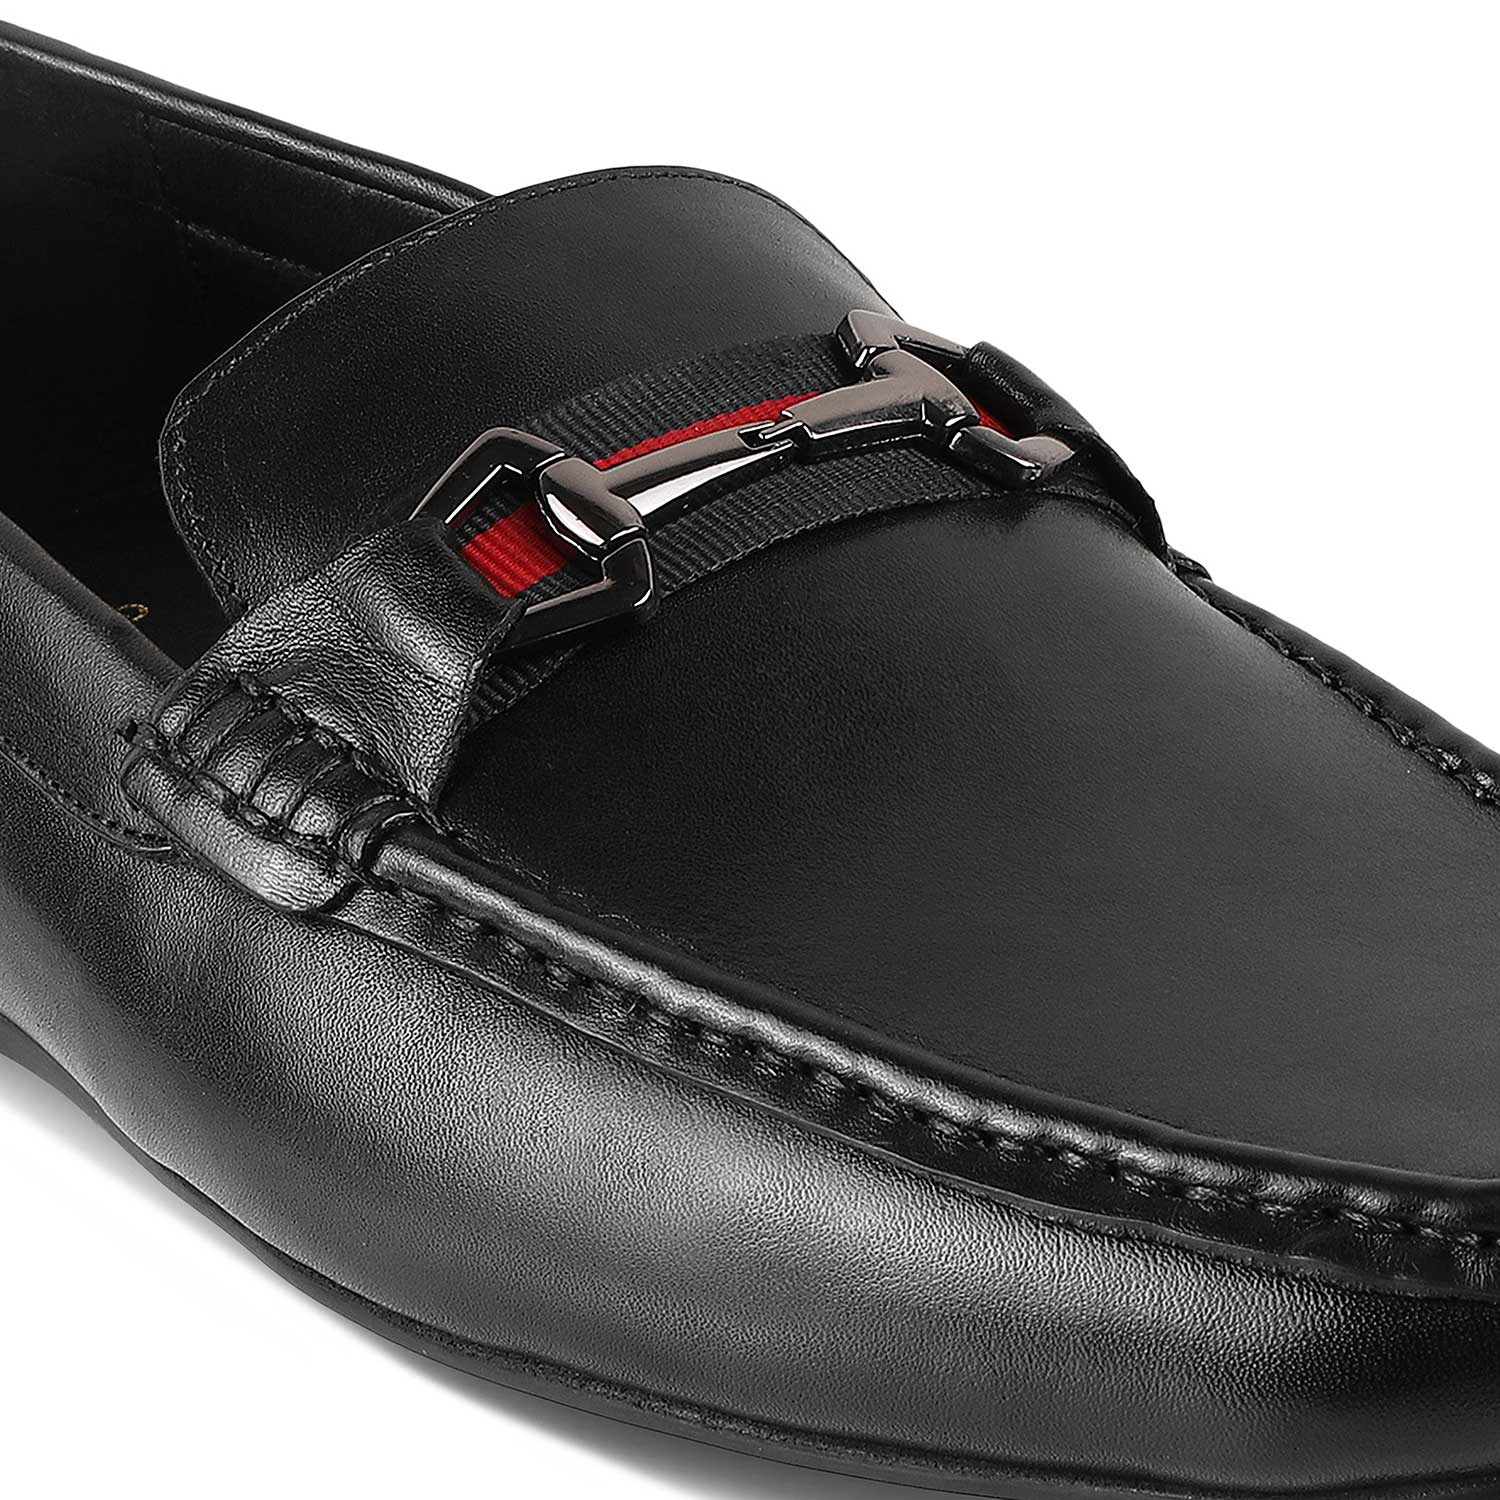 The Ondrive Black Men's Leather Driving Loafers Tresmode - Tresmode